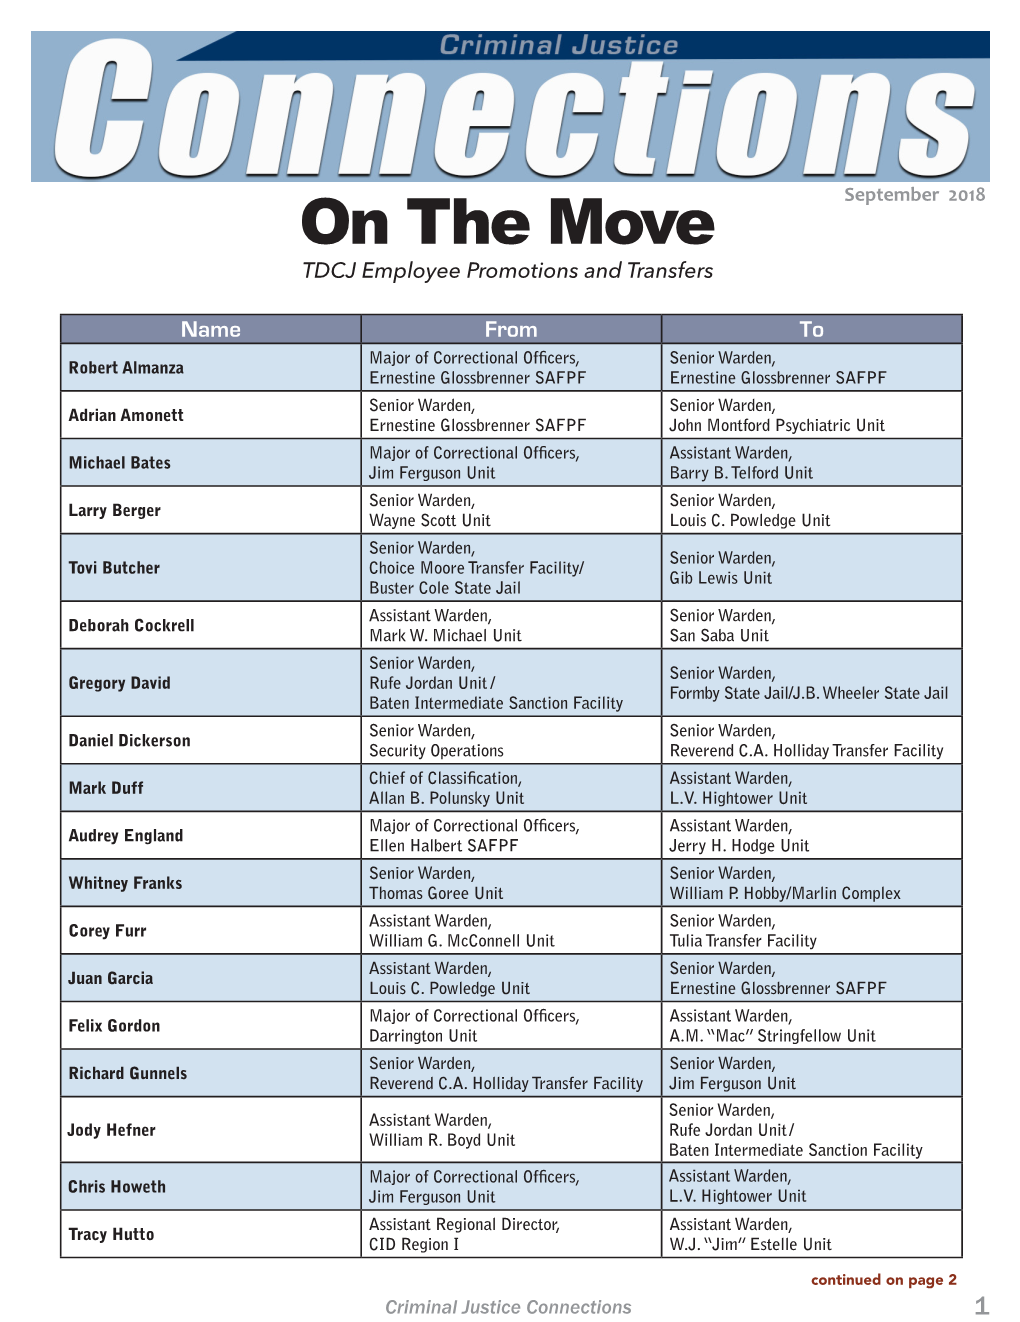 On the Move, September 2018